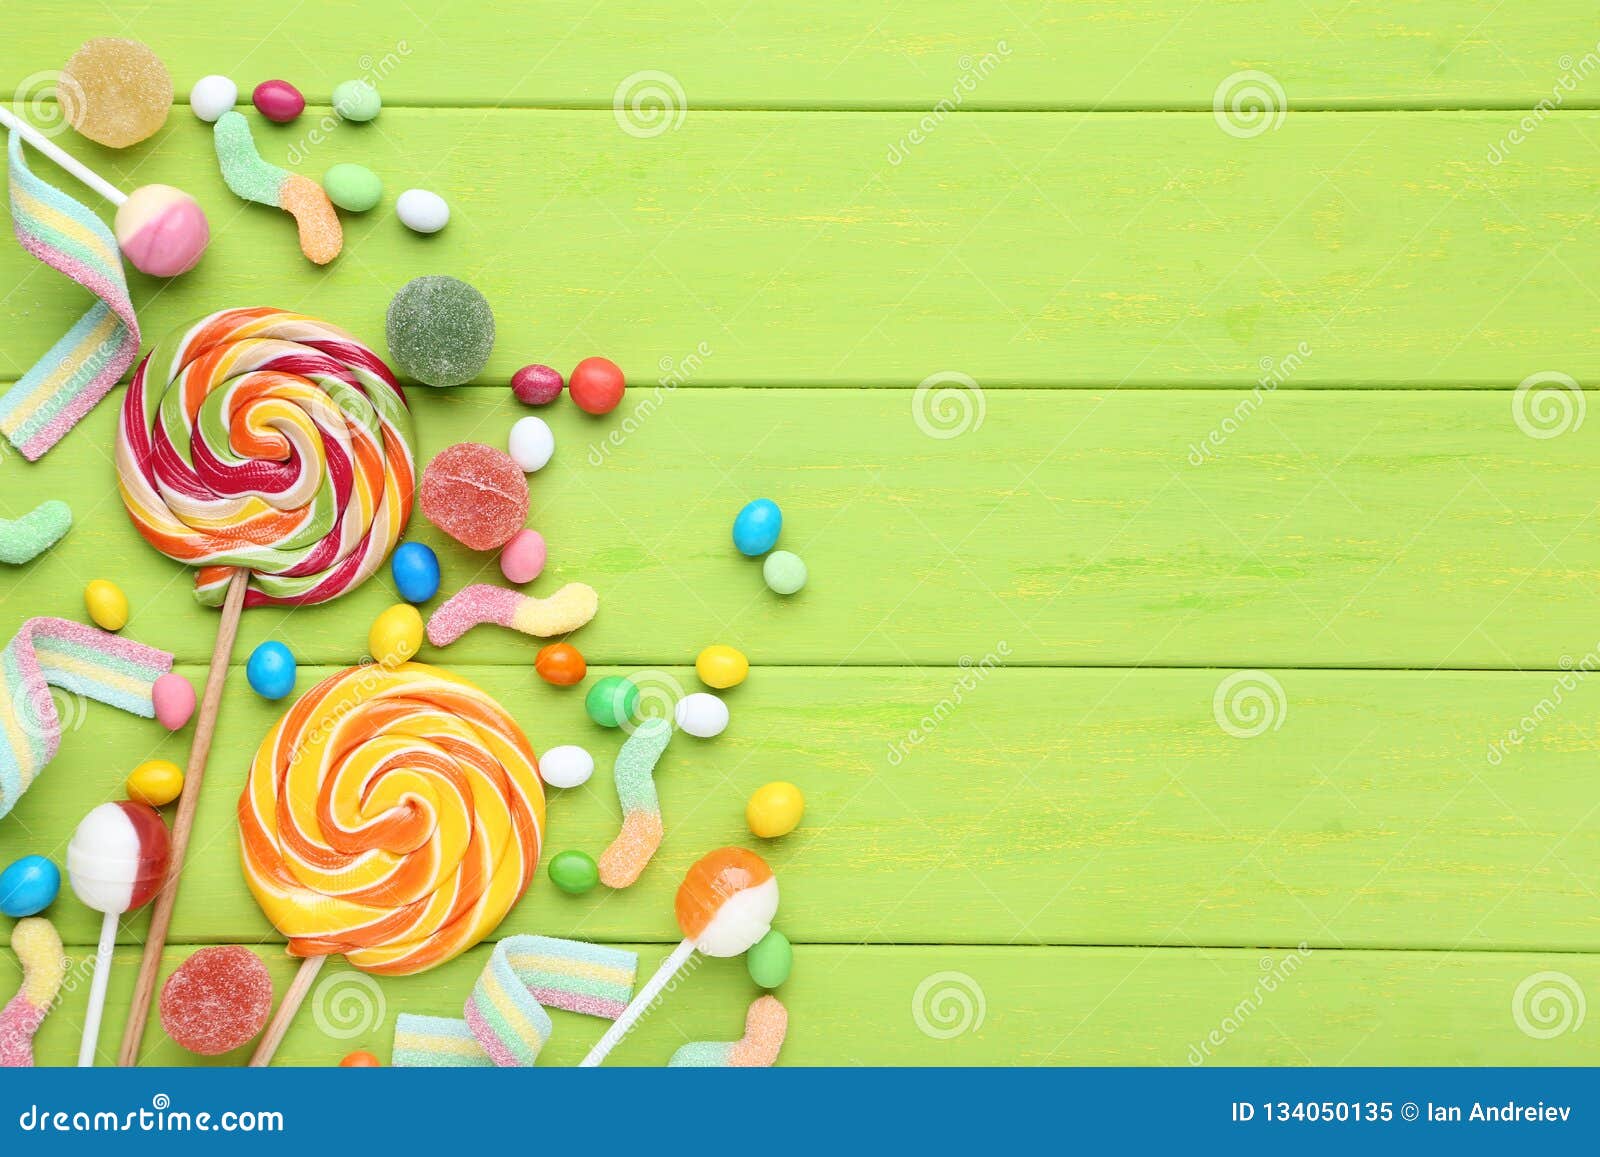 Sweet Candies and Lollipops Stock Image - Image of stick, delicious ...